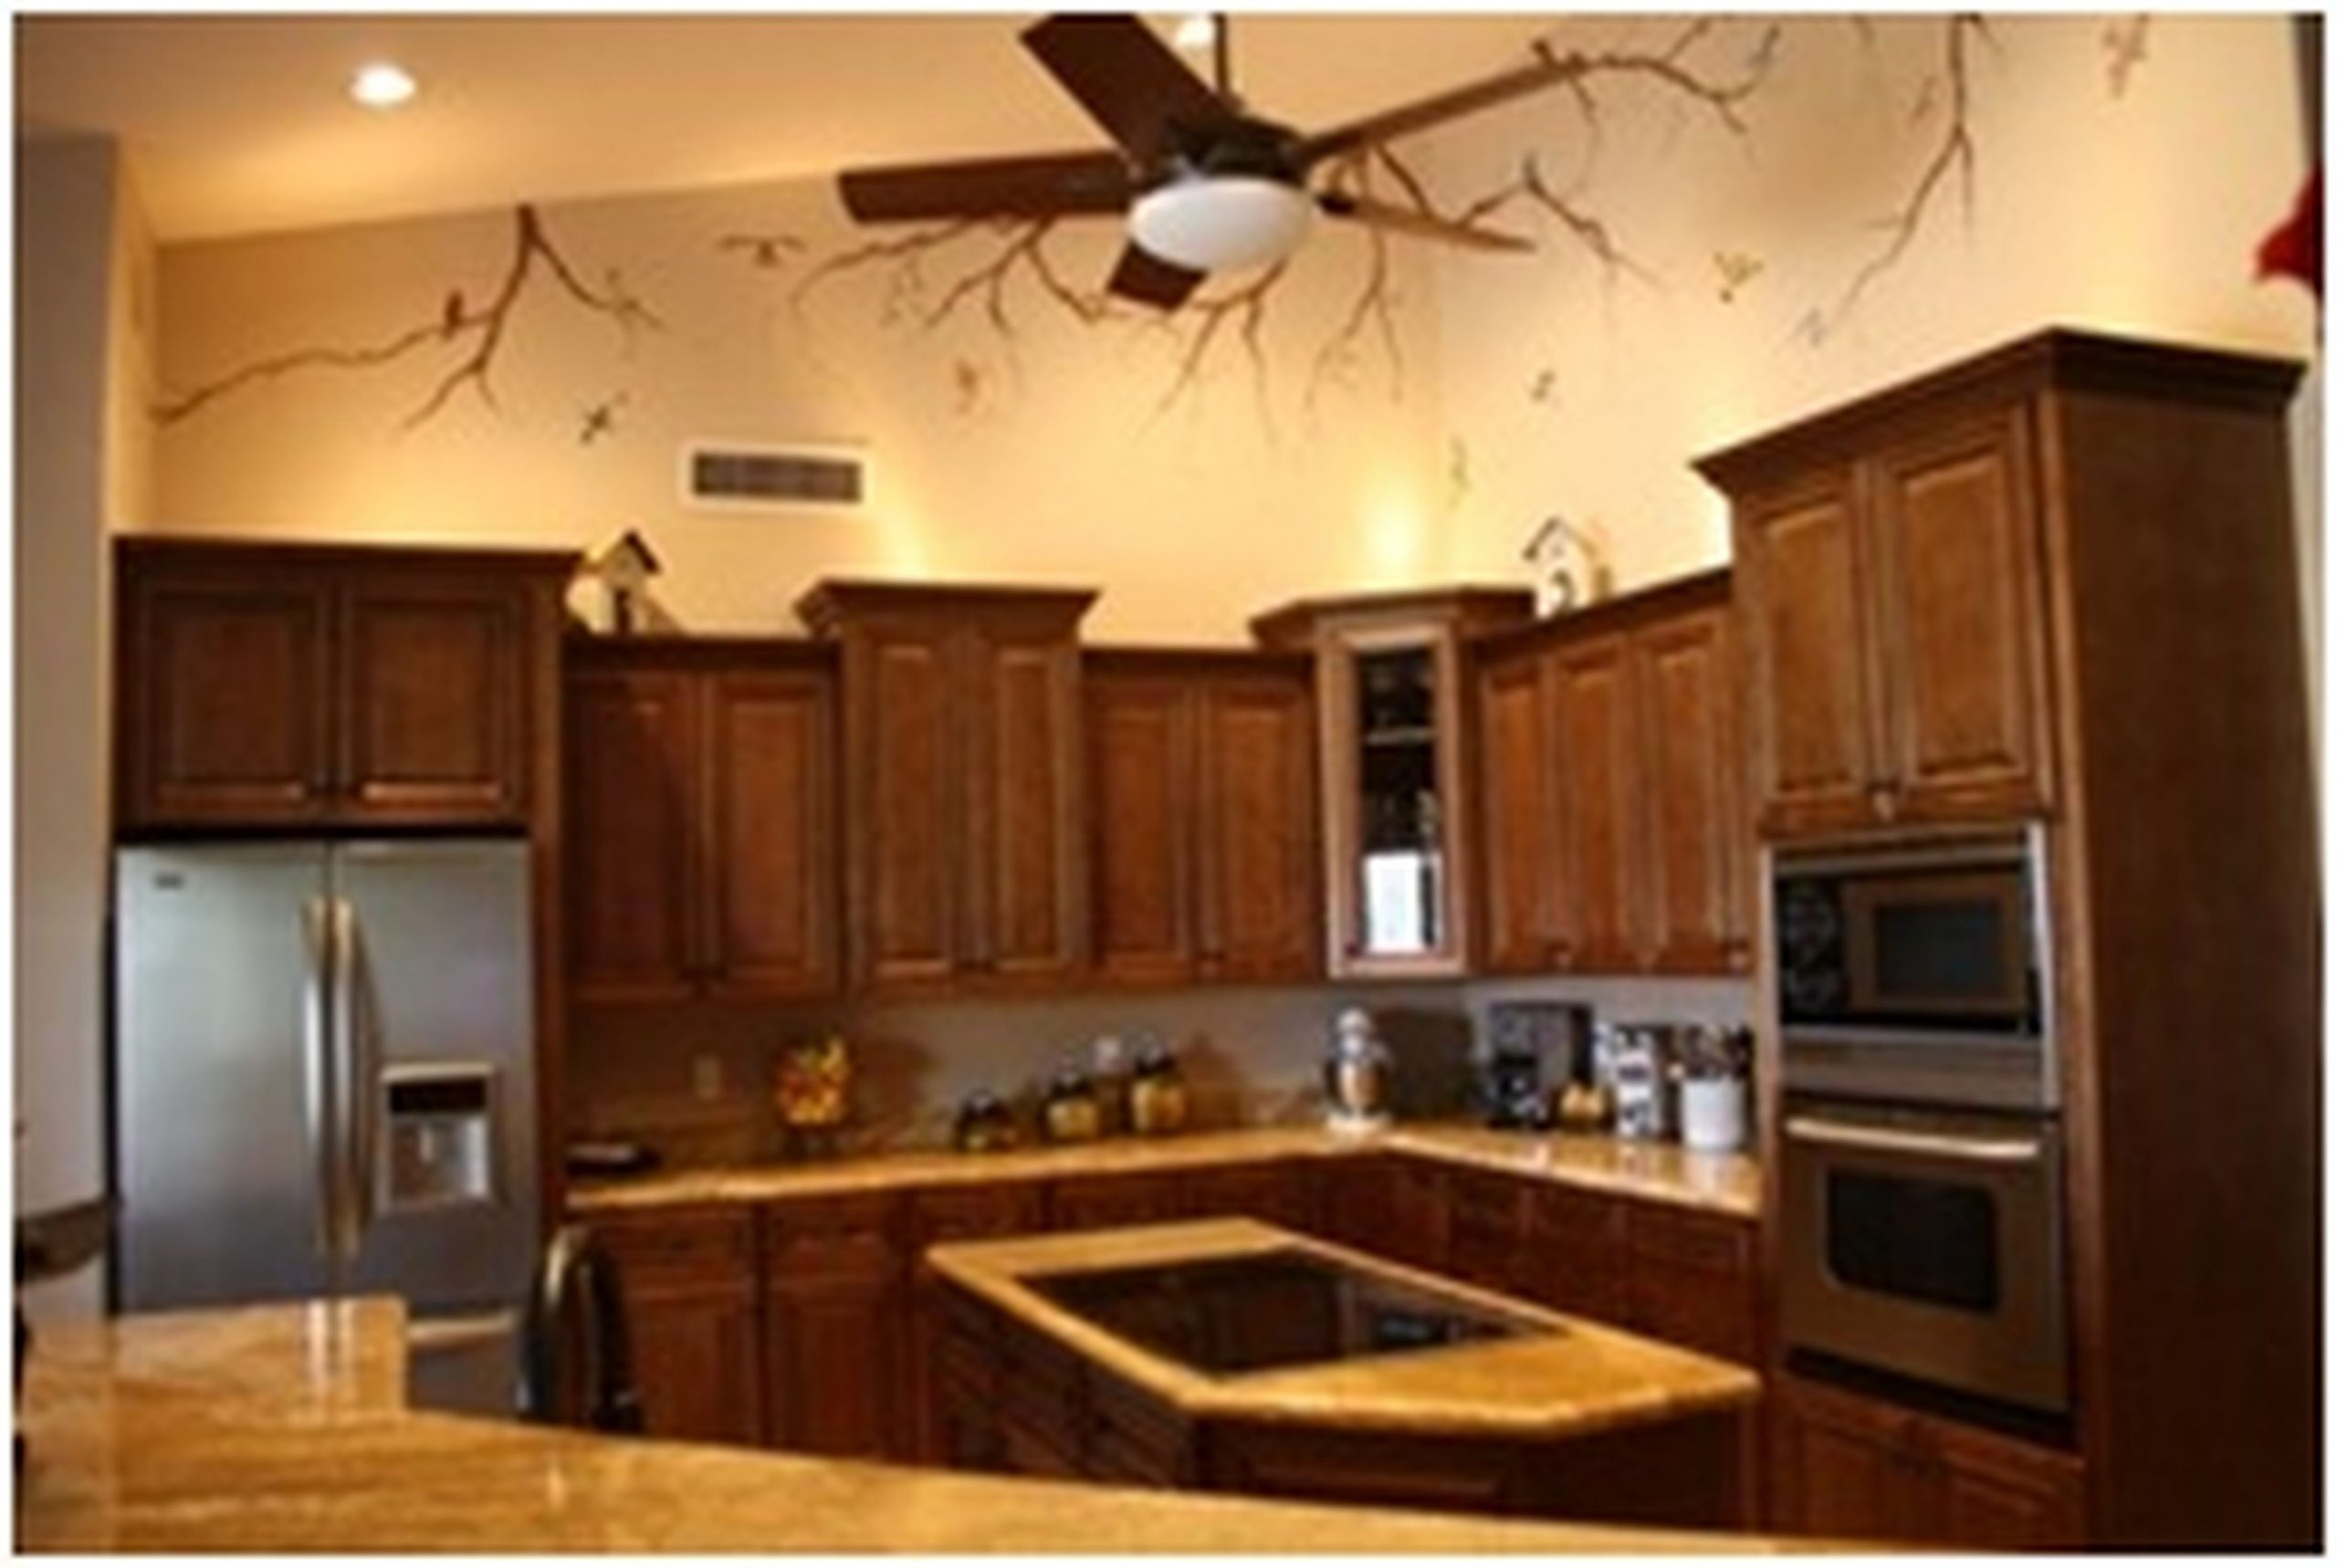 Paint Colors For Kitchen Walls With Oak Cabinets